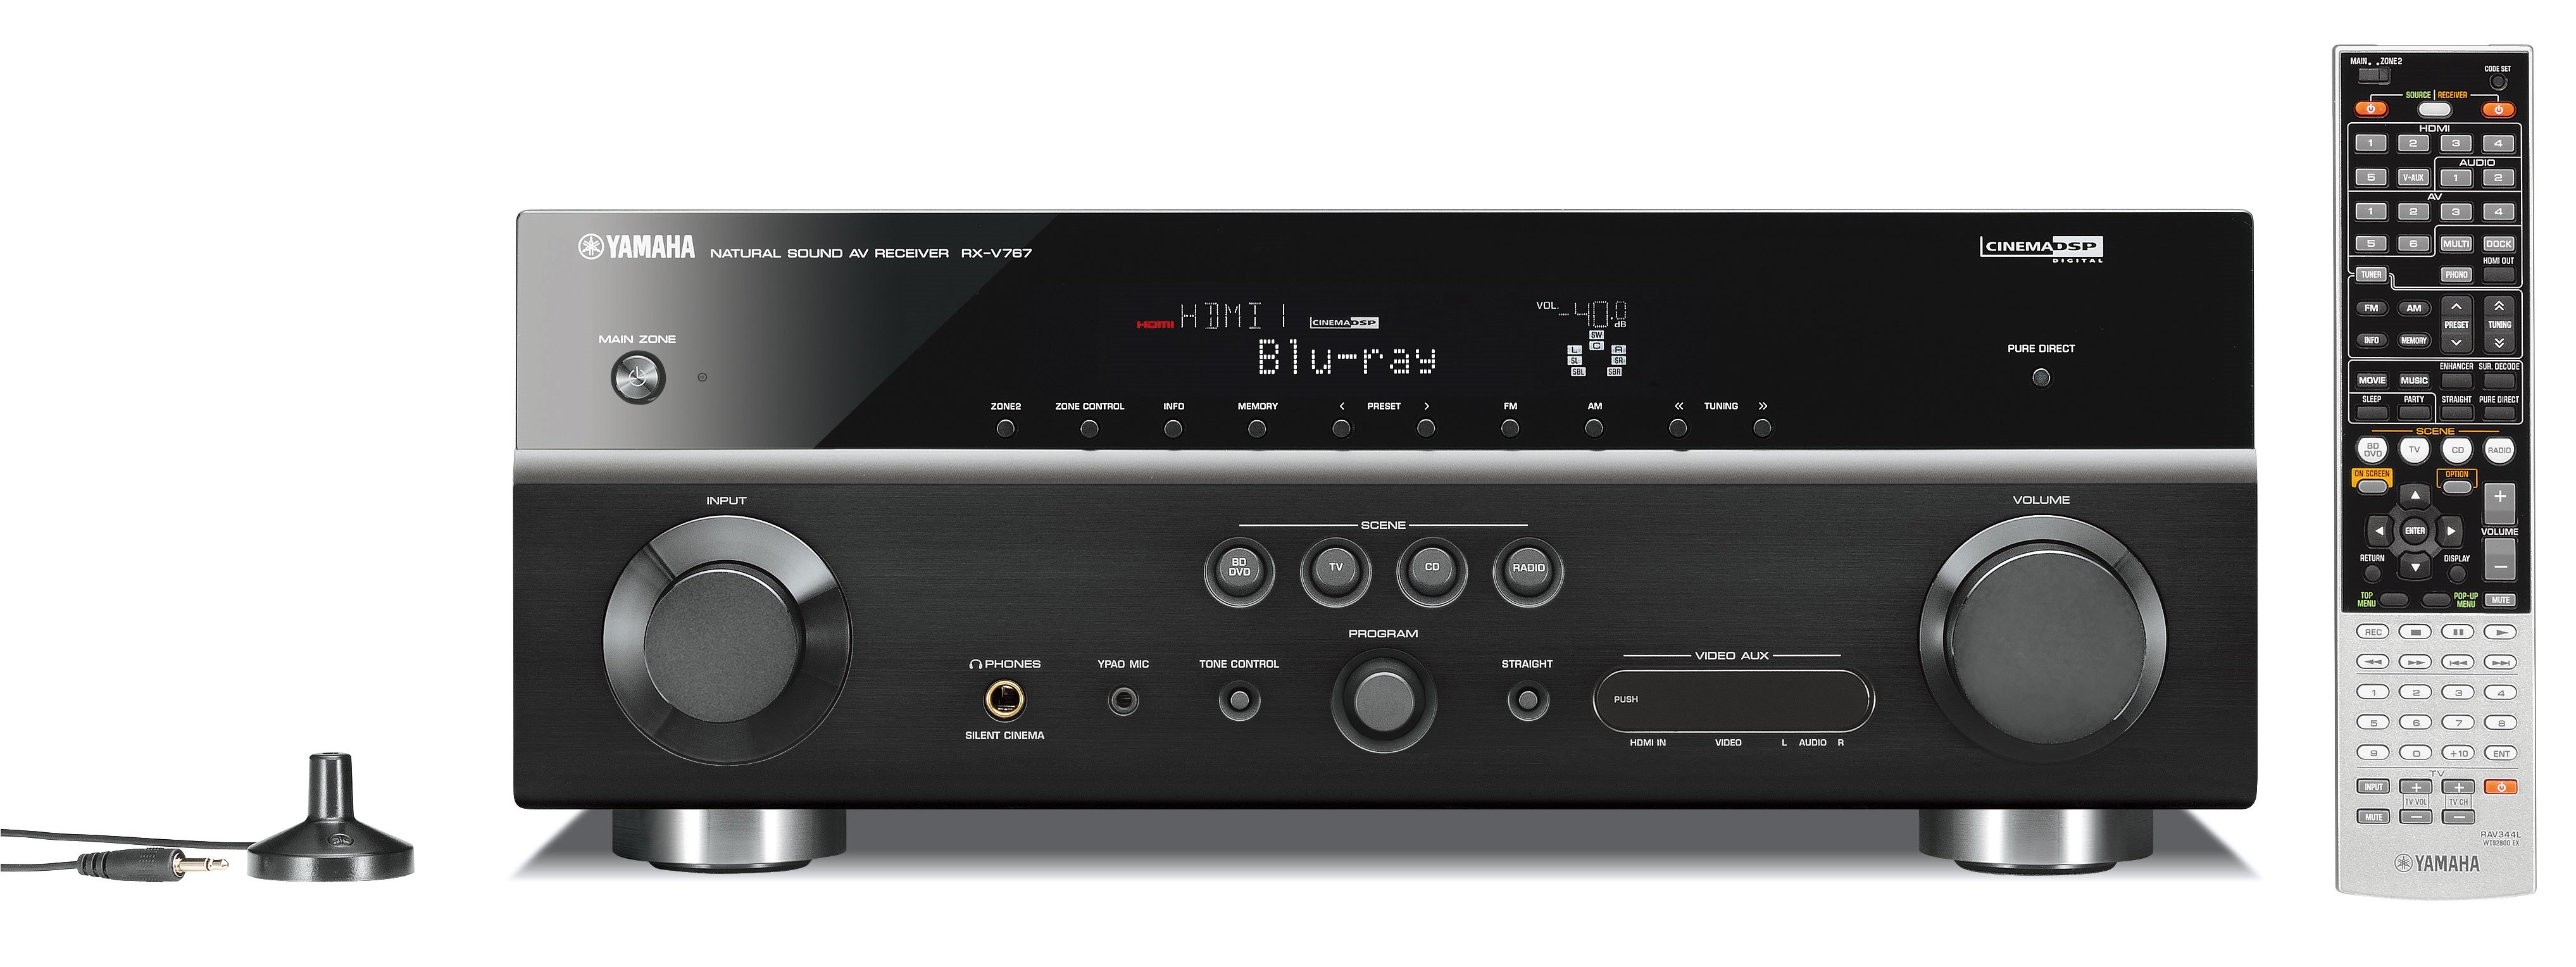 RX-V767 - Overview - AV Receivers - Audio & Visual - Products